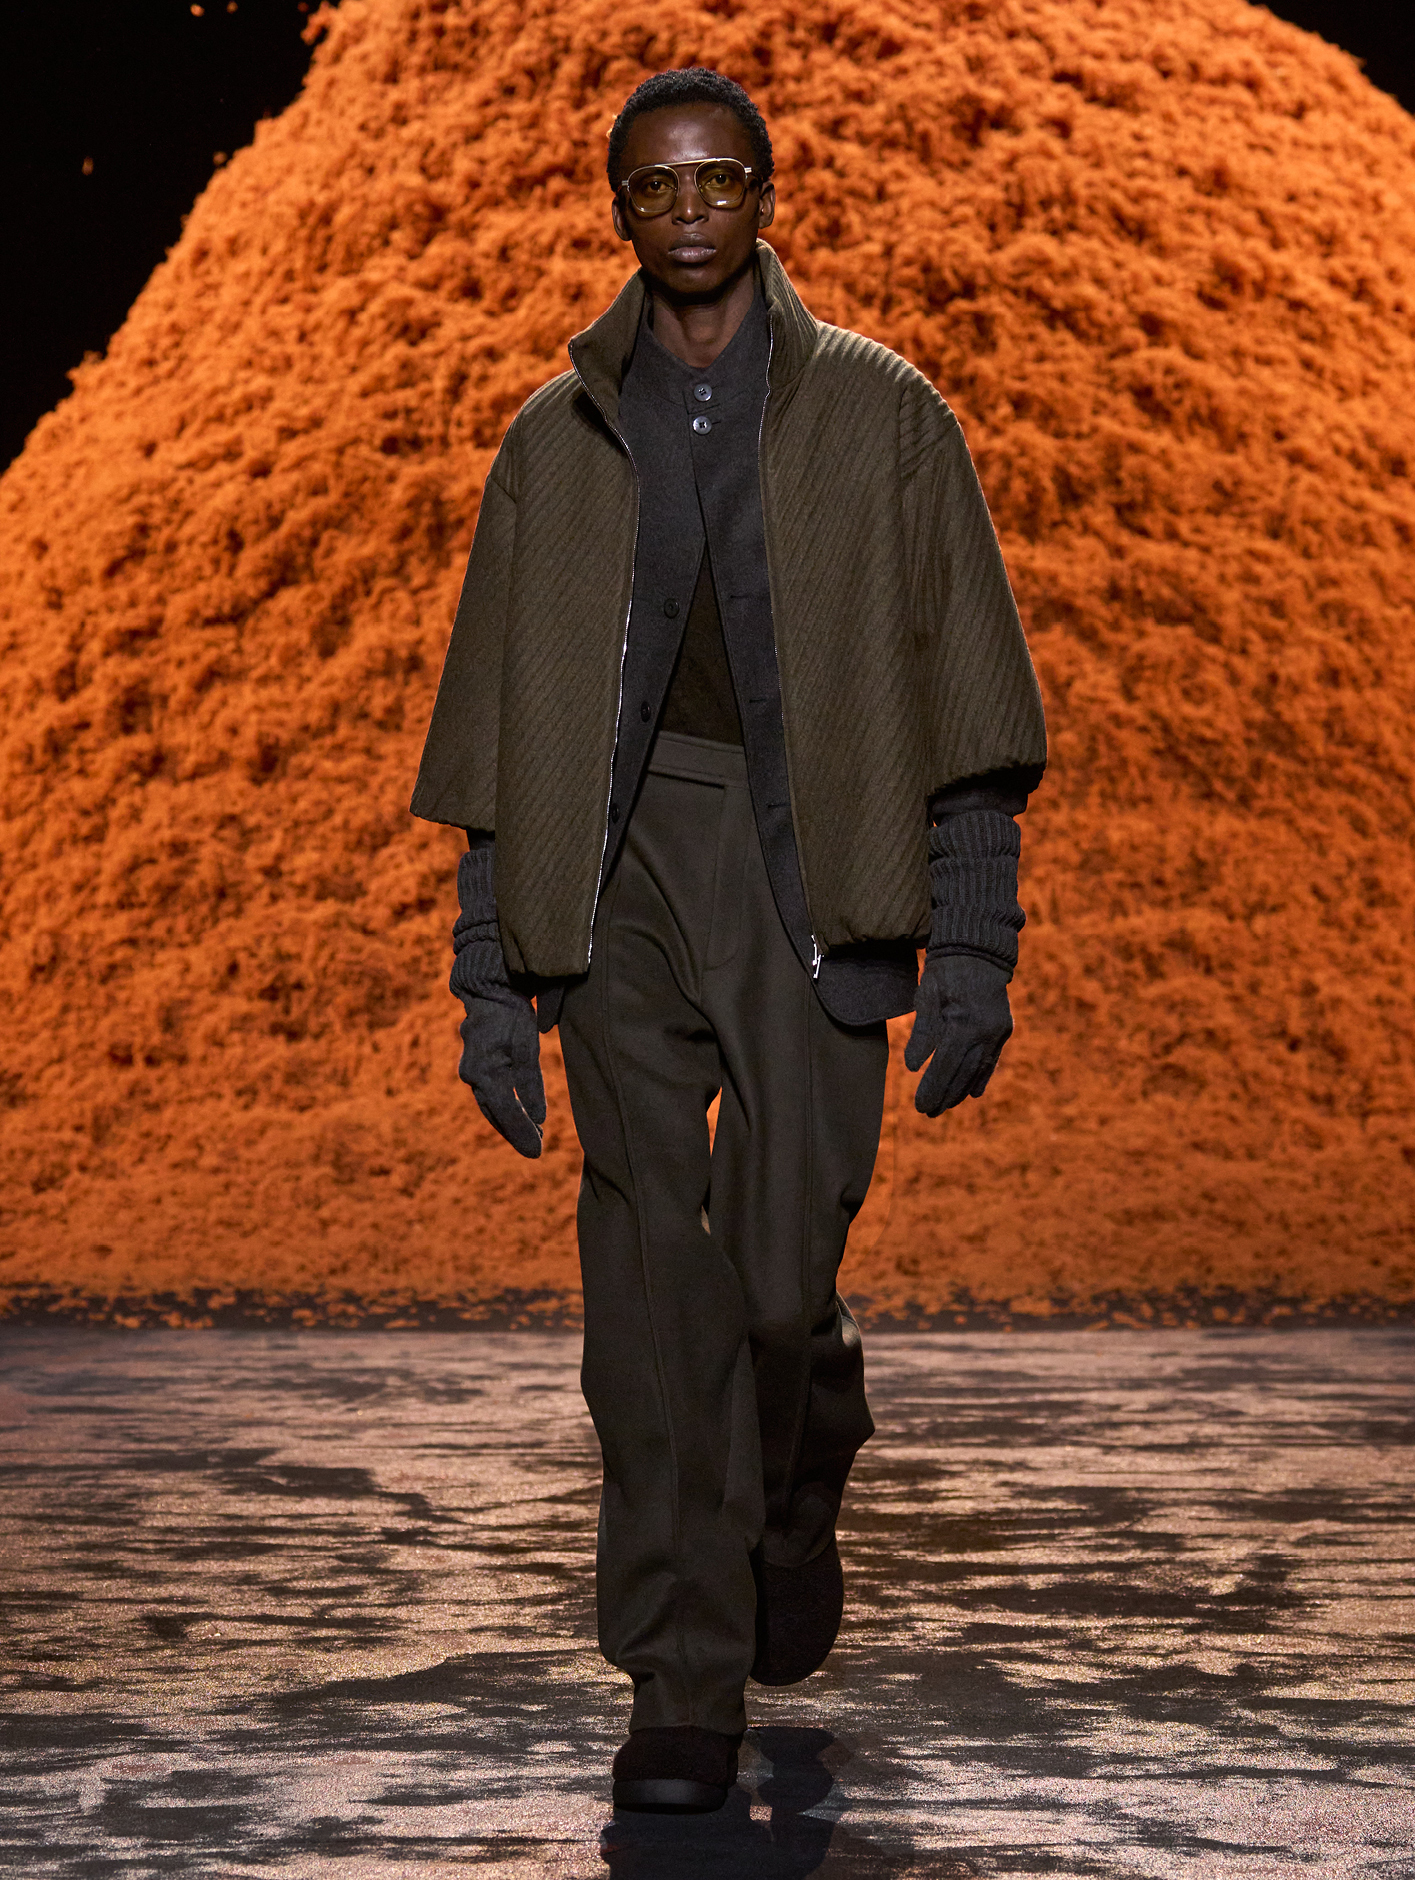 Utilitarian garments in monochromatic permutations reinforced the sense of harmony that suffused the space